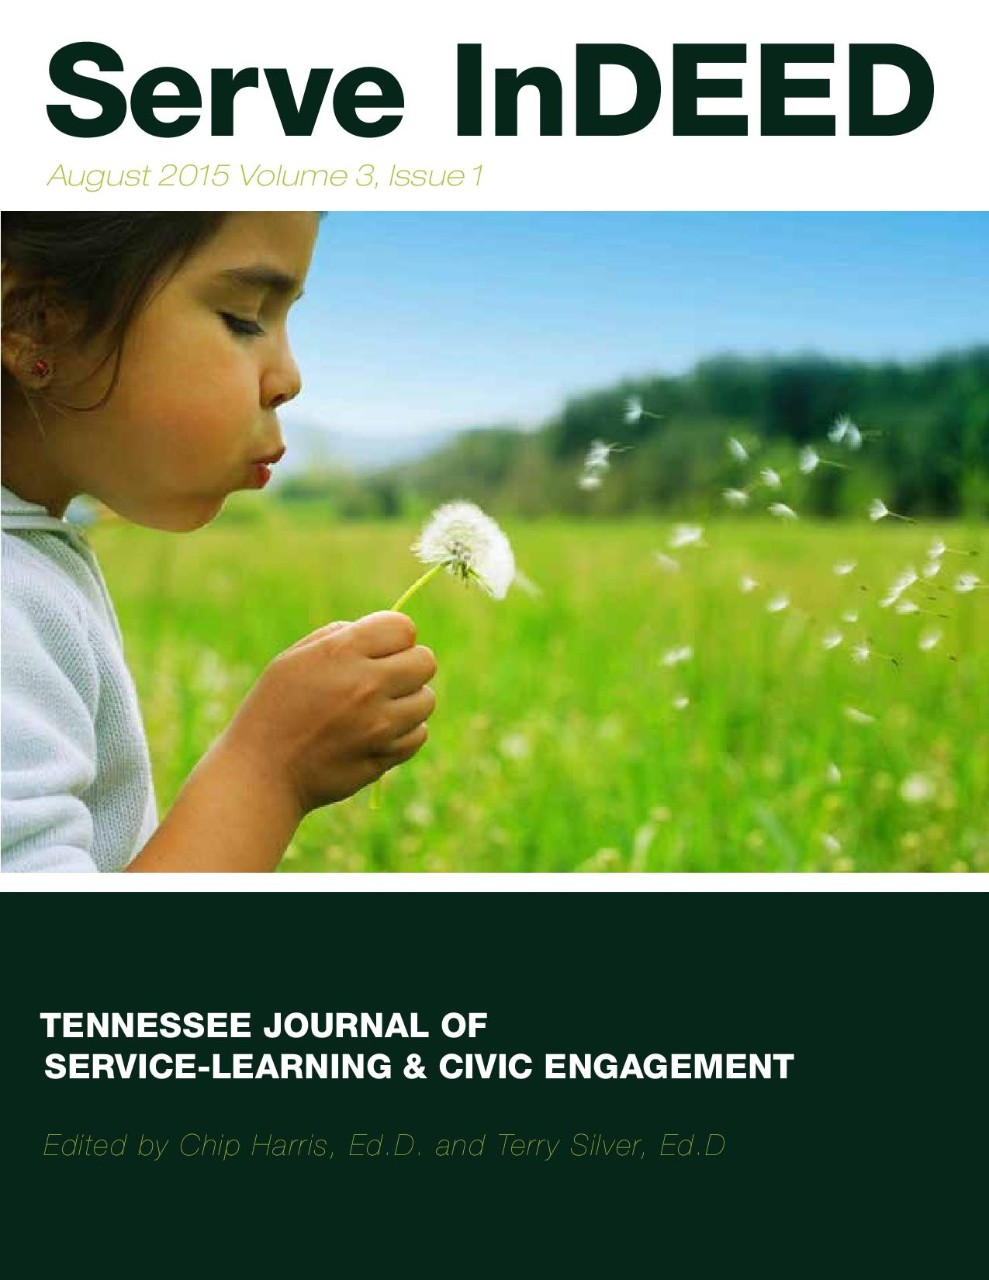 Tennessee Journal of Service-Learning and Civic Engagement Vol3